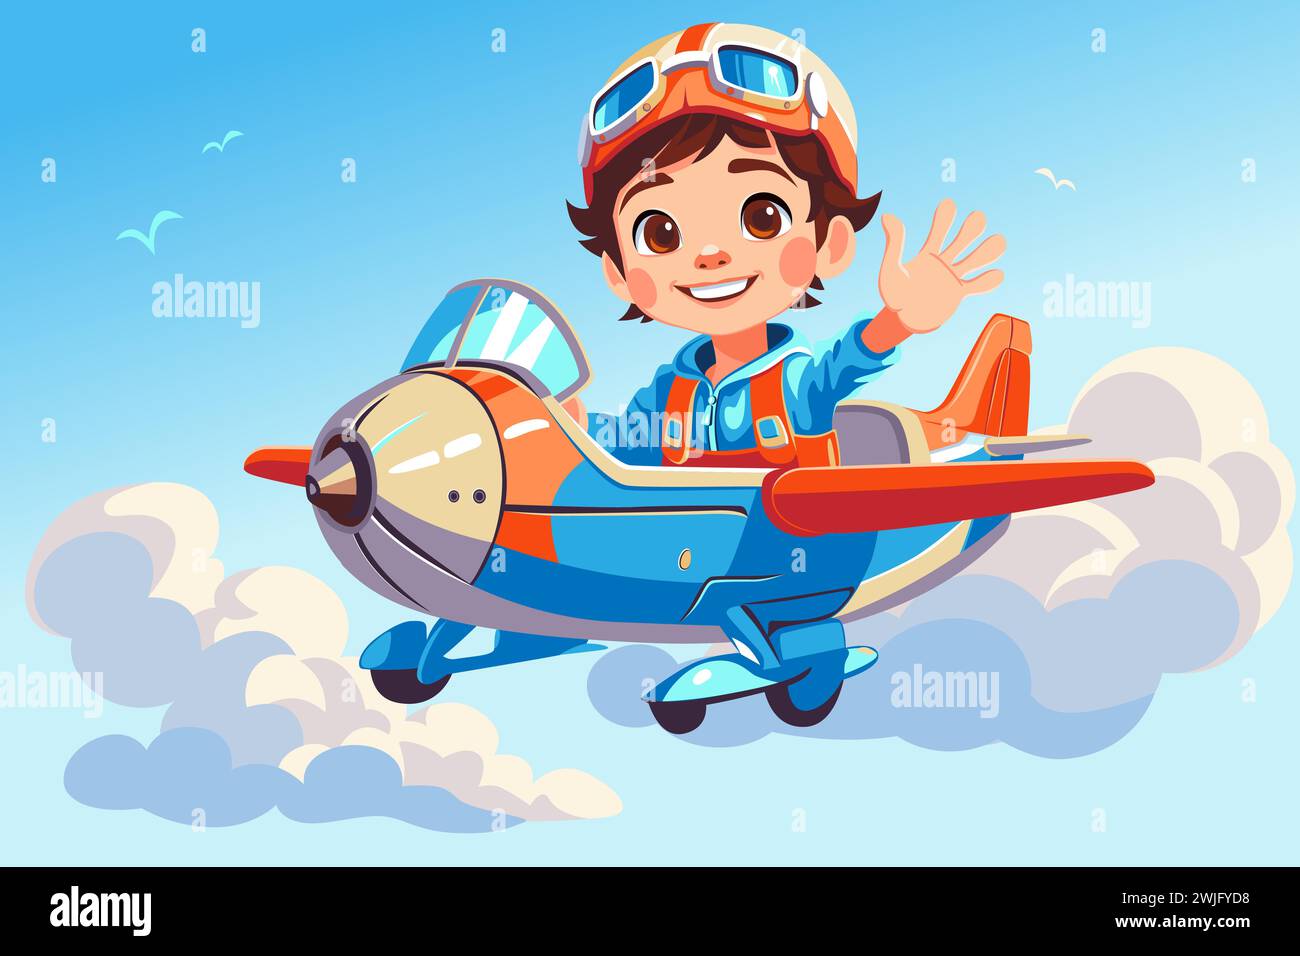 Cartoon kid pilot flying on toy airplane in sky with aviator goggles and happy smiling Stock Vector